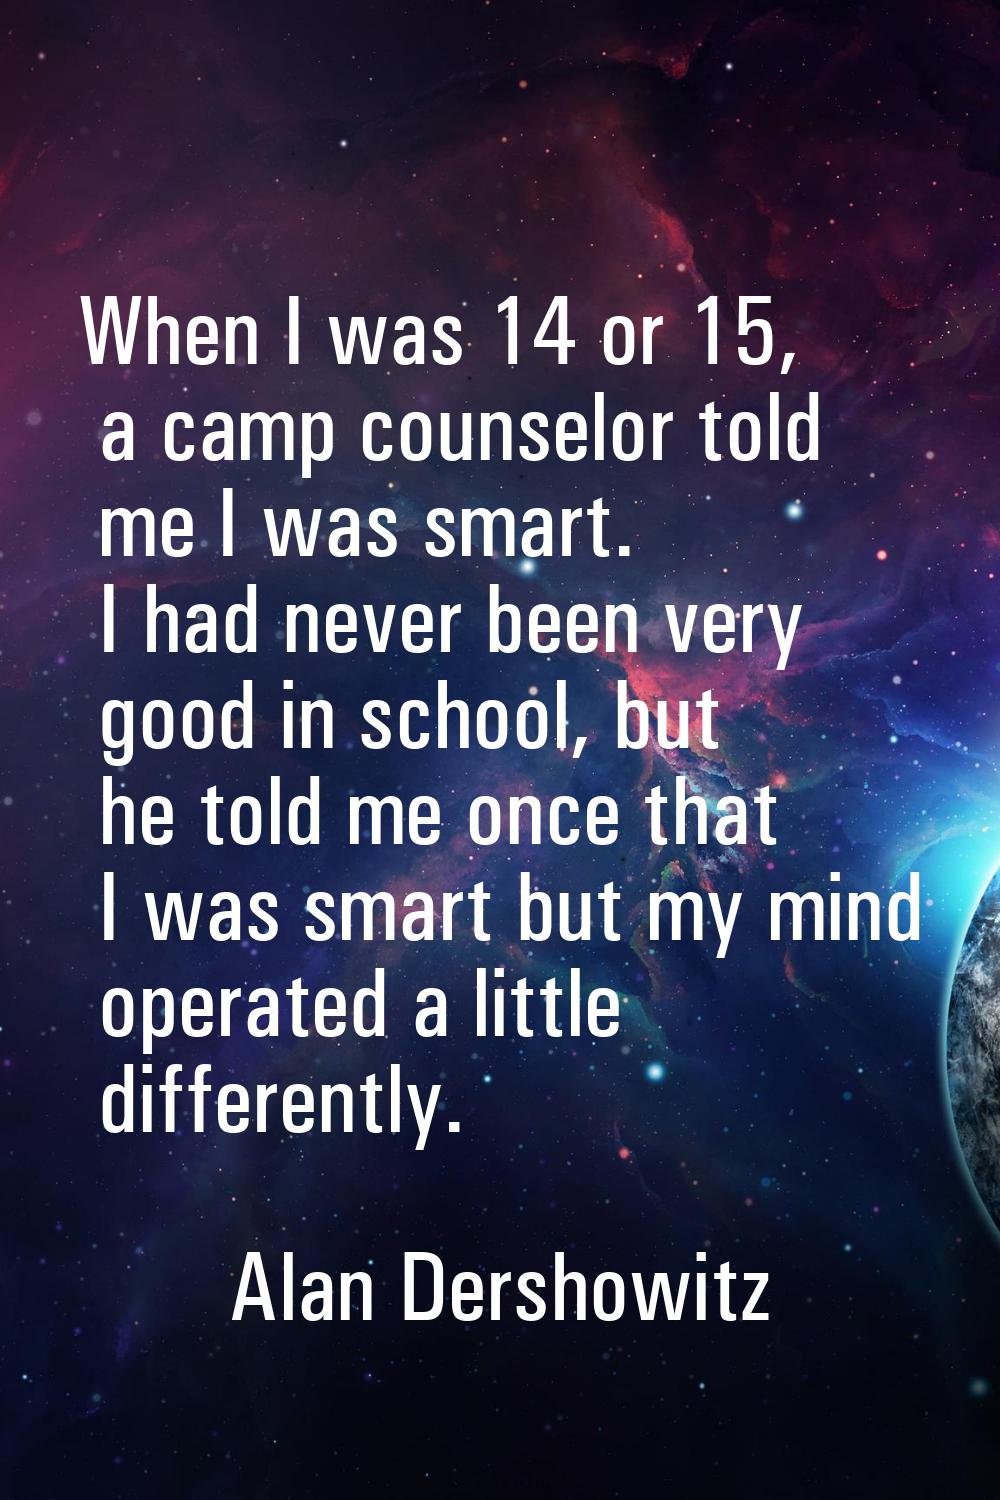 When I was 14 or 15, a camp counselor told me I was smart. I had never been very good in school, bu